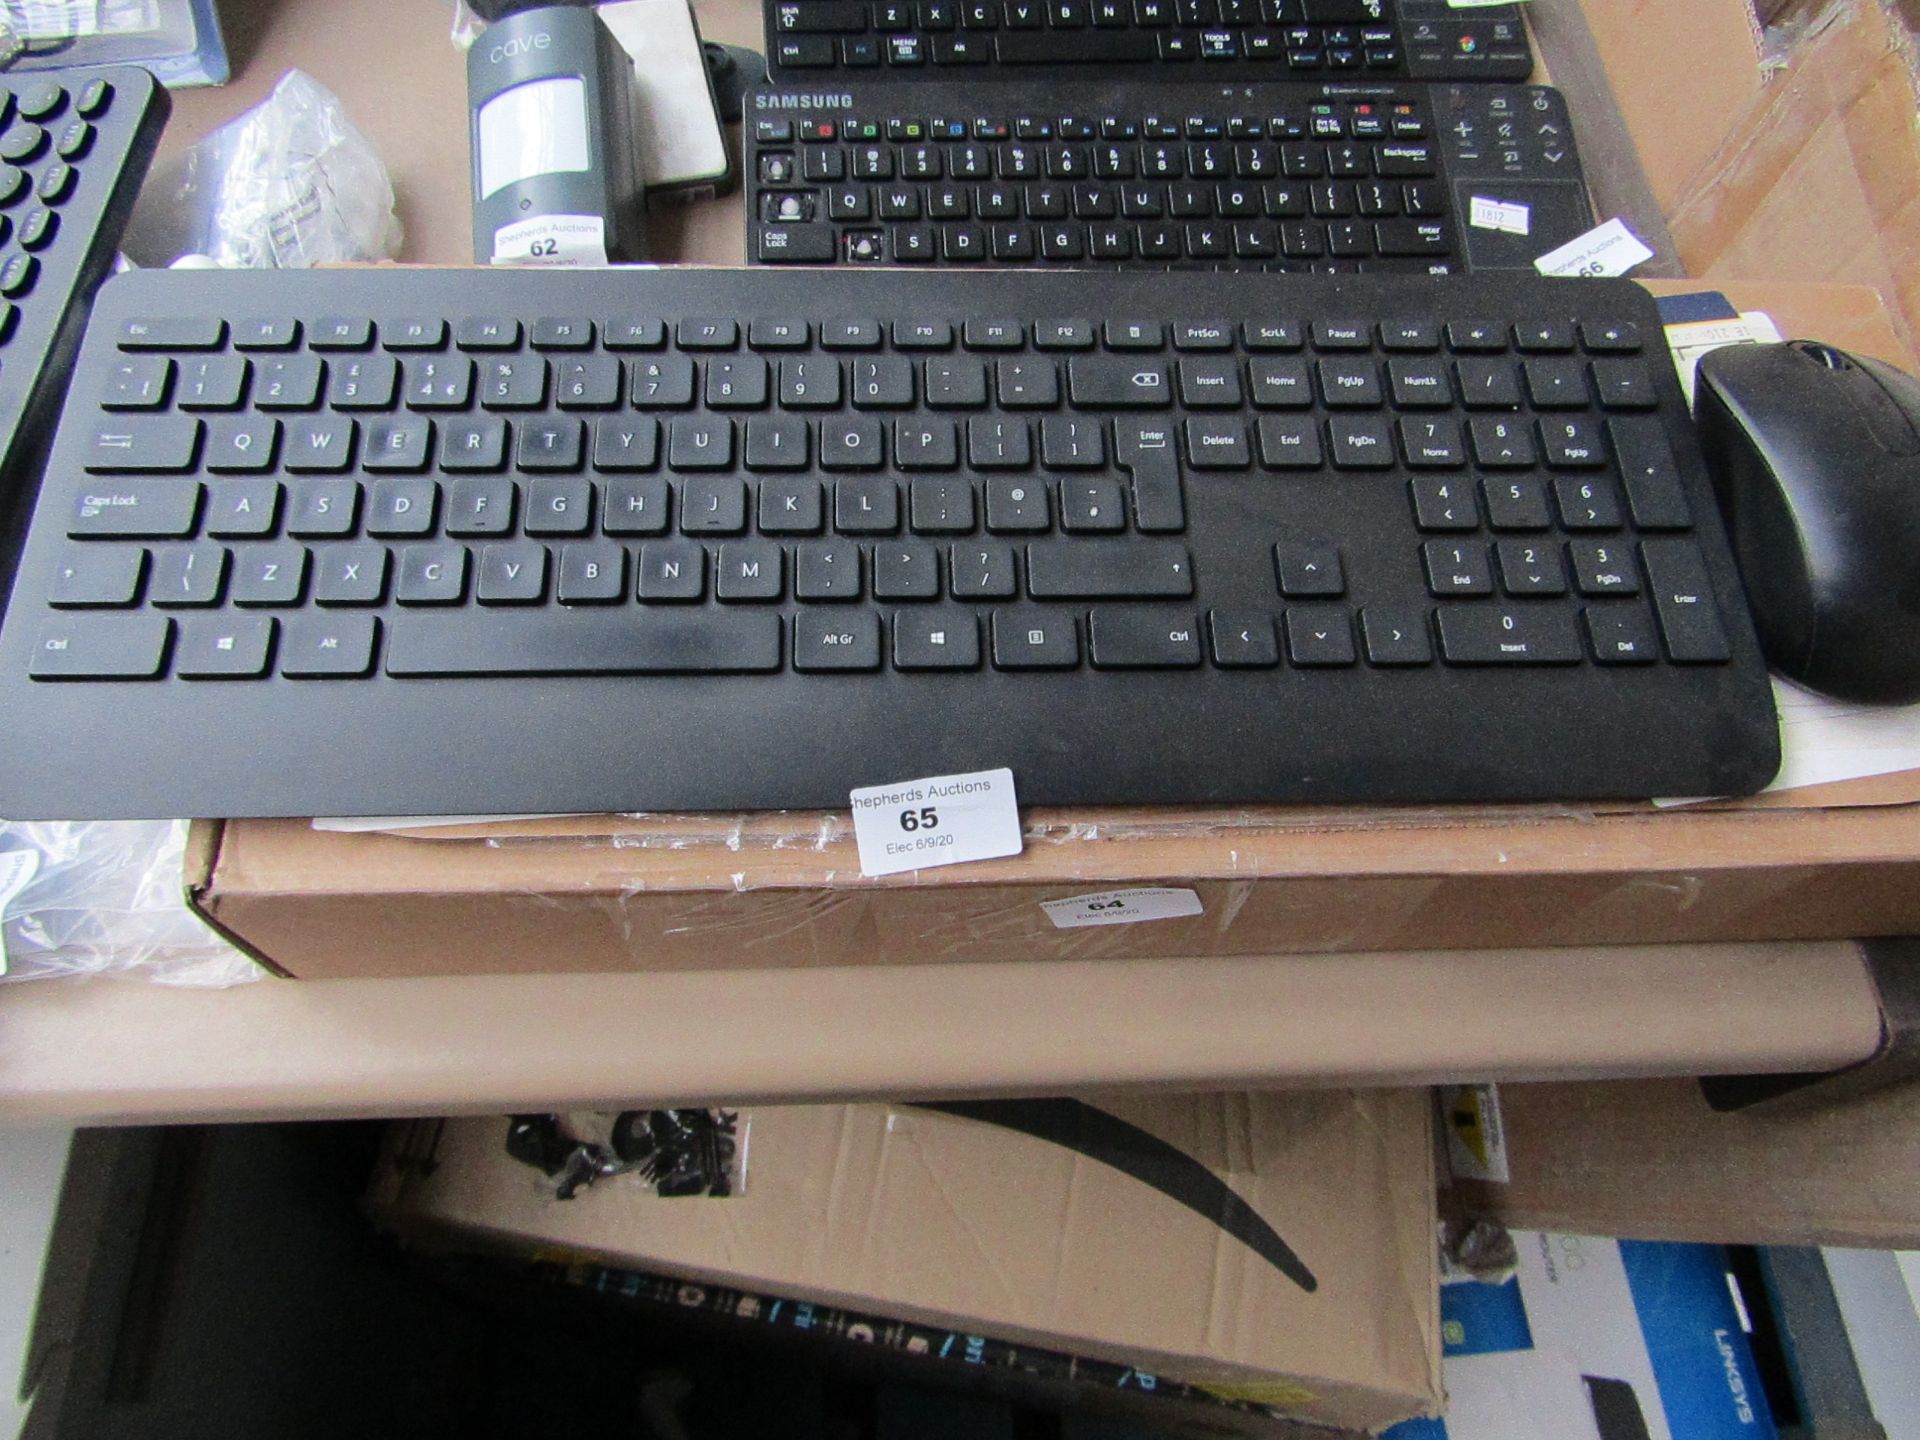 Wireless keyboard and mouse set, unchecked and boxed.